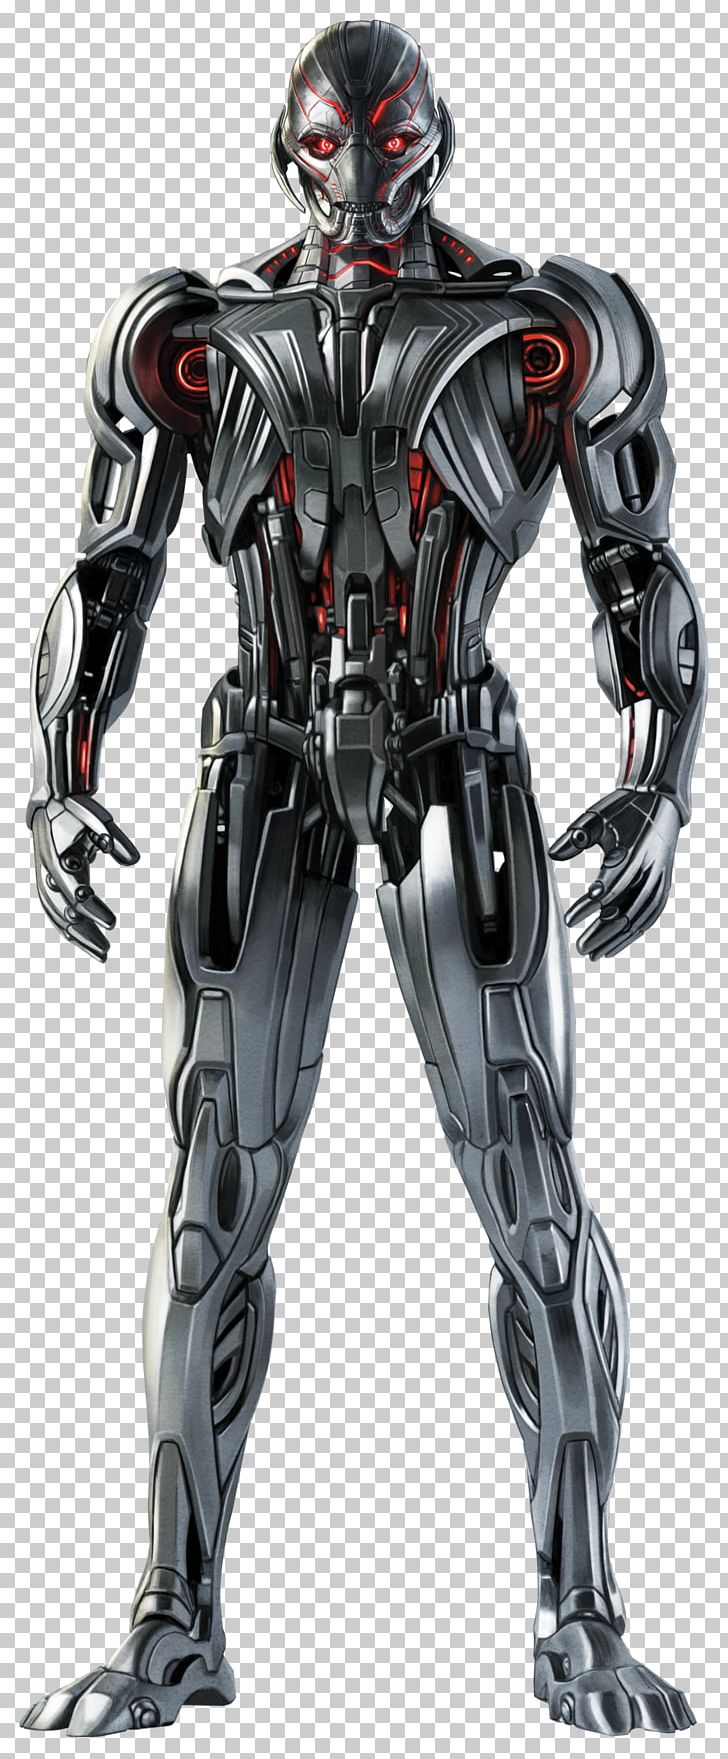 Ultron Black Widow Vision Hulk Iron Man PNG, Clipart, Action Figure, Armour, Avengers, Avengers Age Of Ultron, Comics Free PNG Download